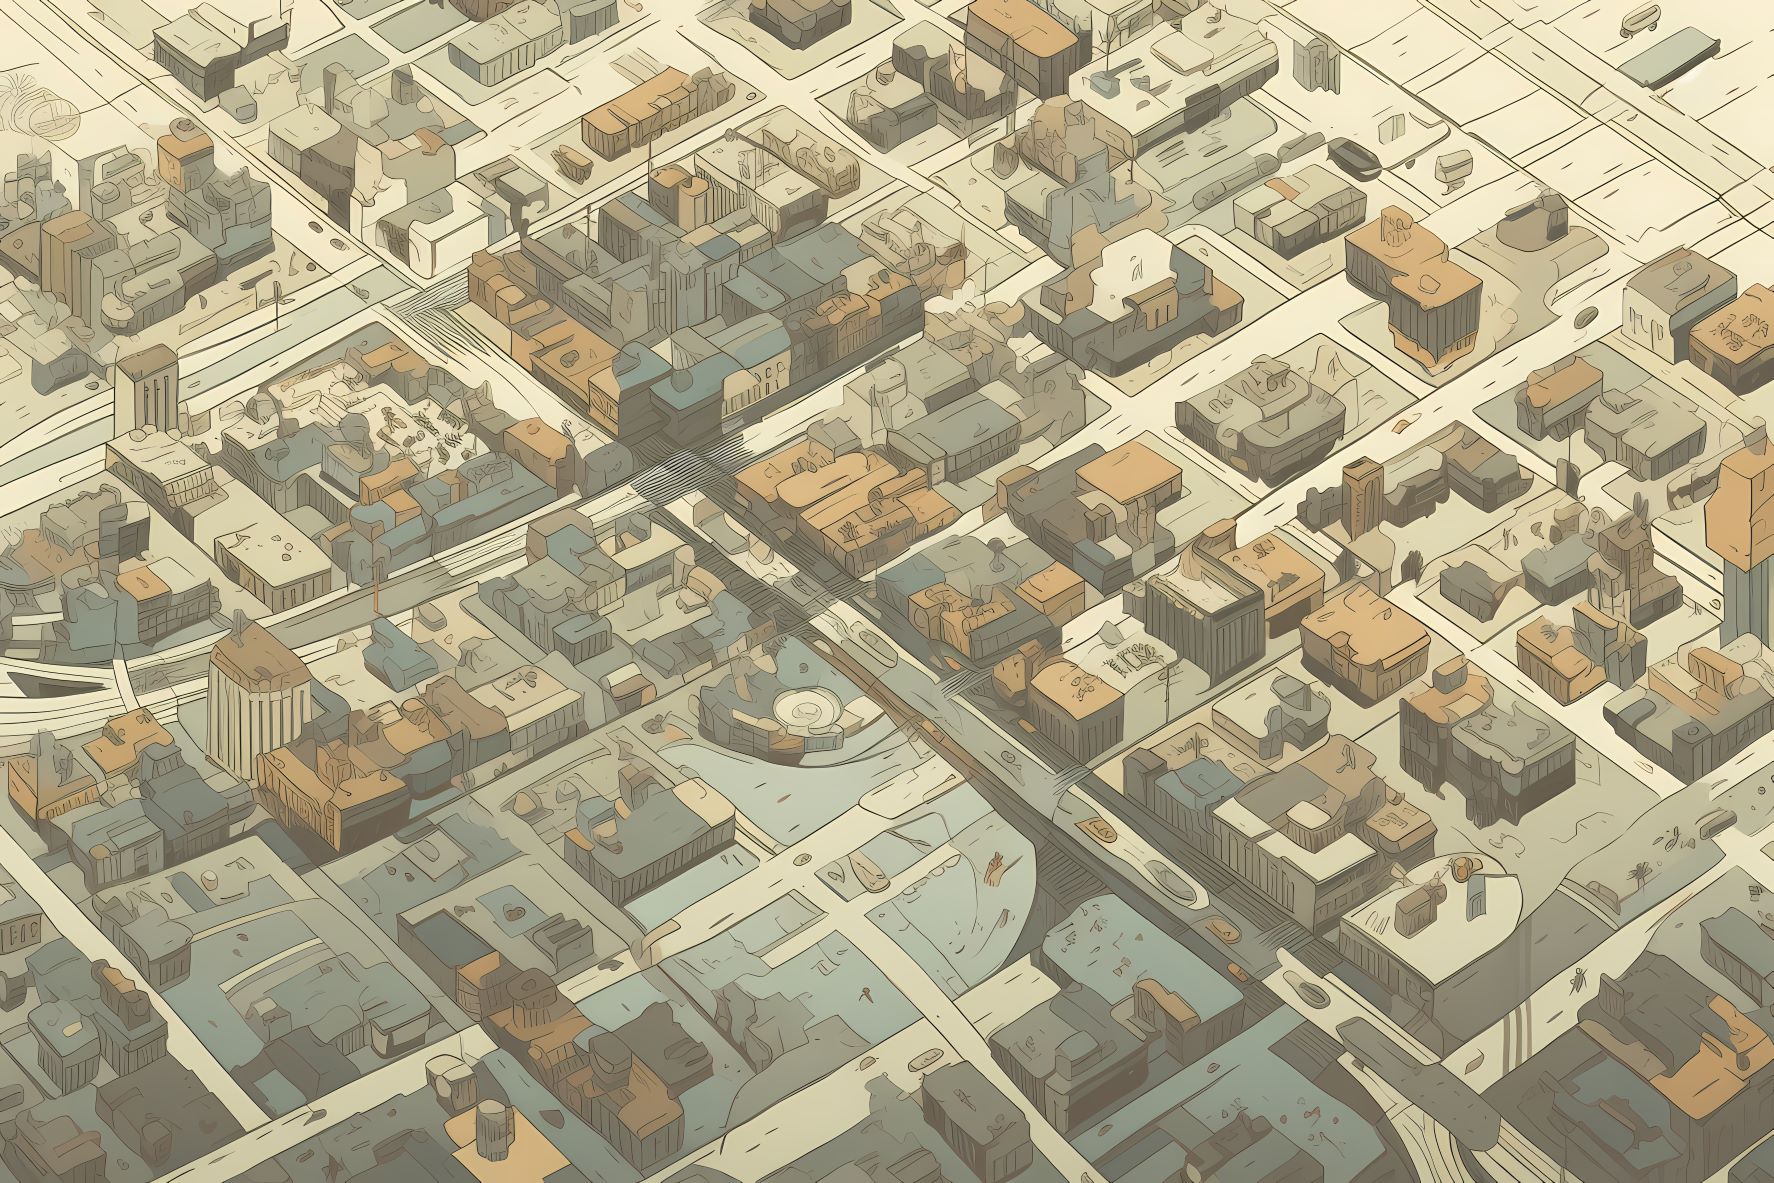 Isobenefit Urbanism: The Future of Green, Meta One-Mile Cities